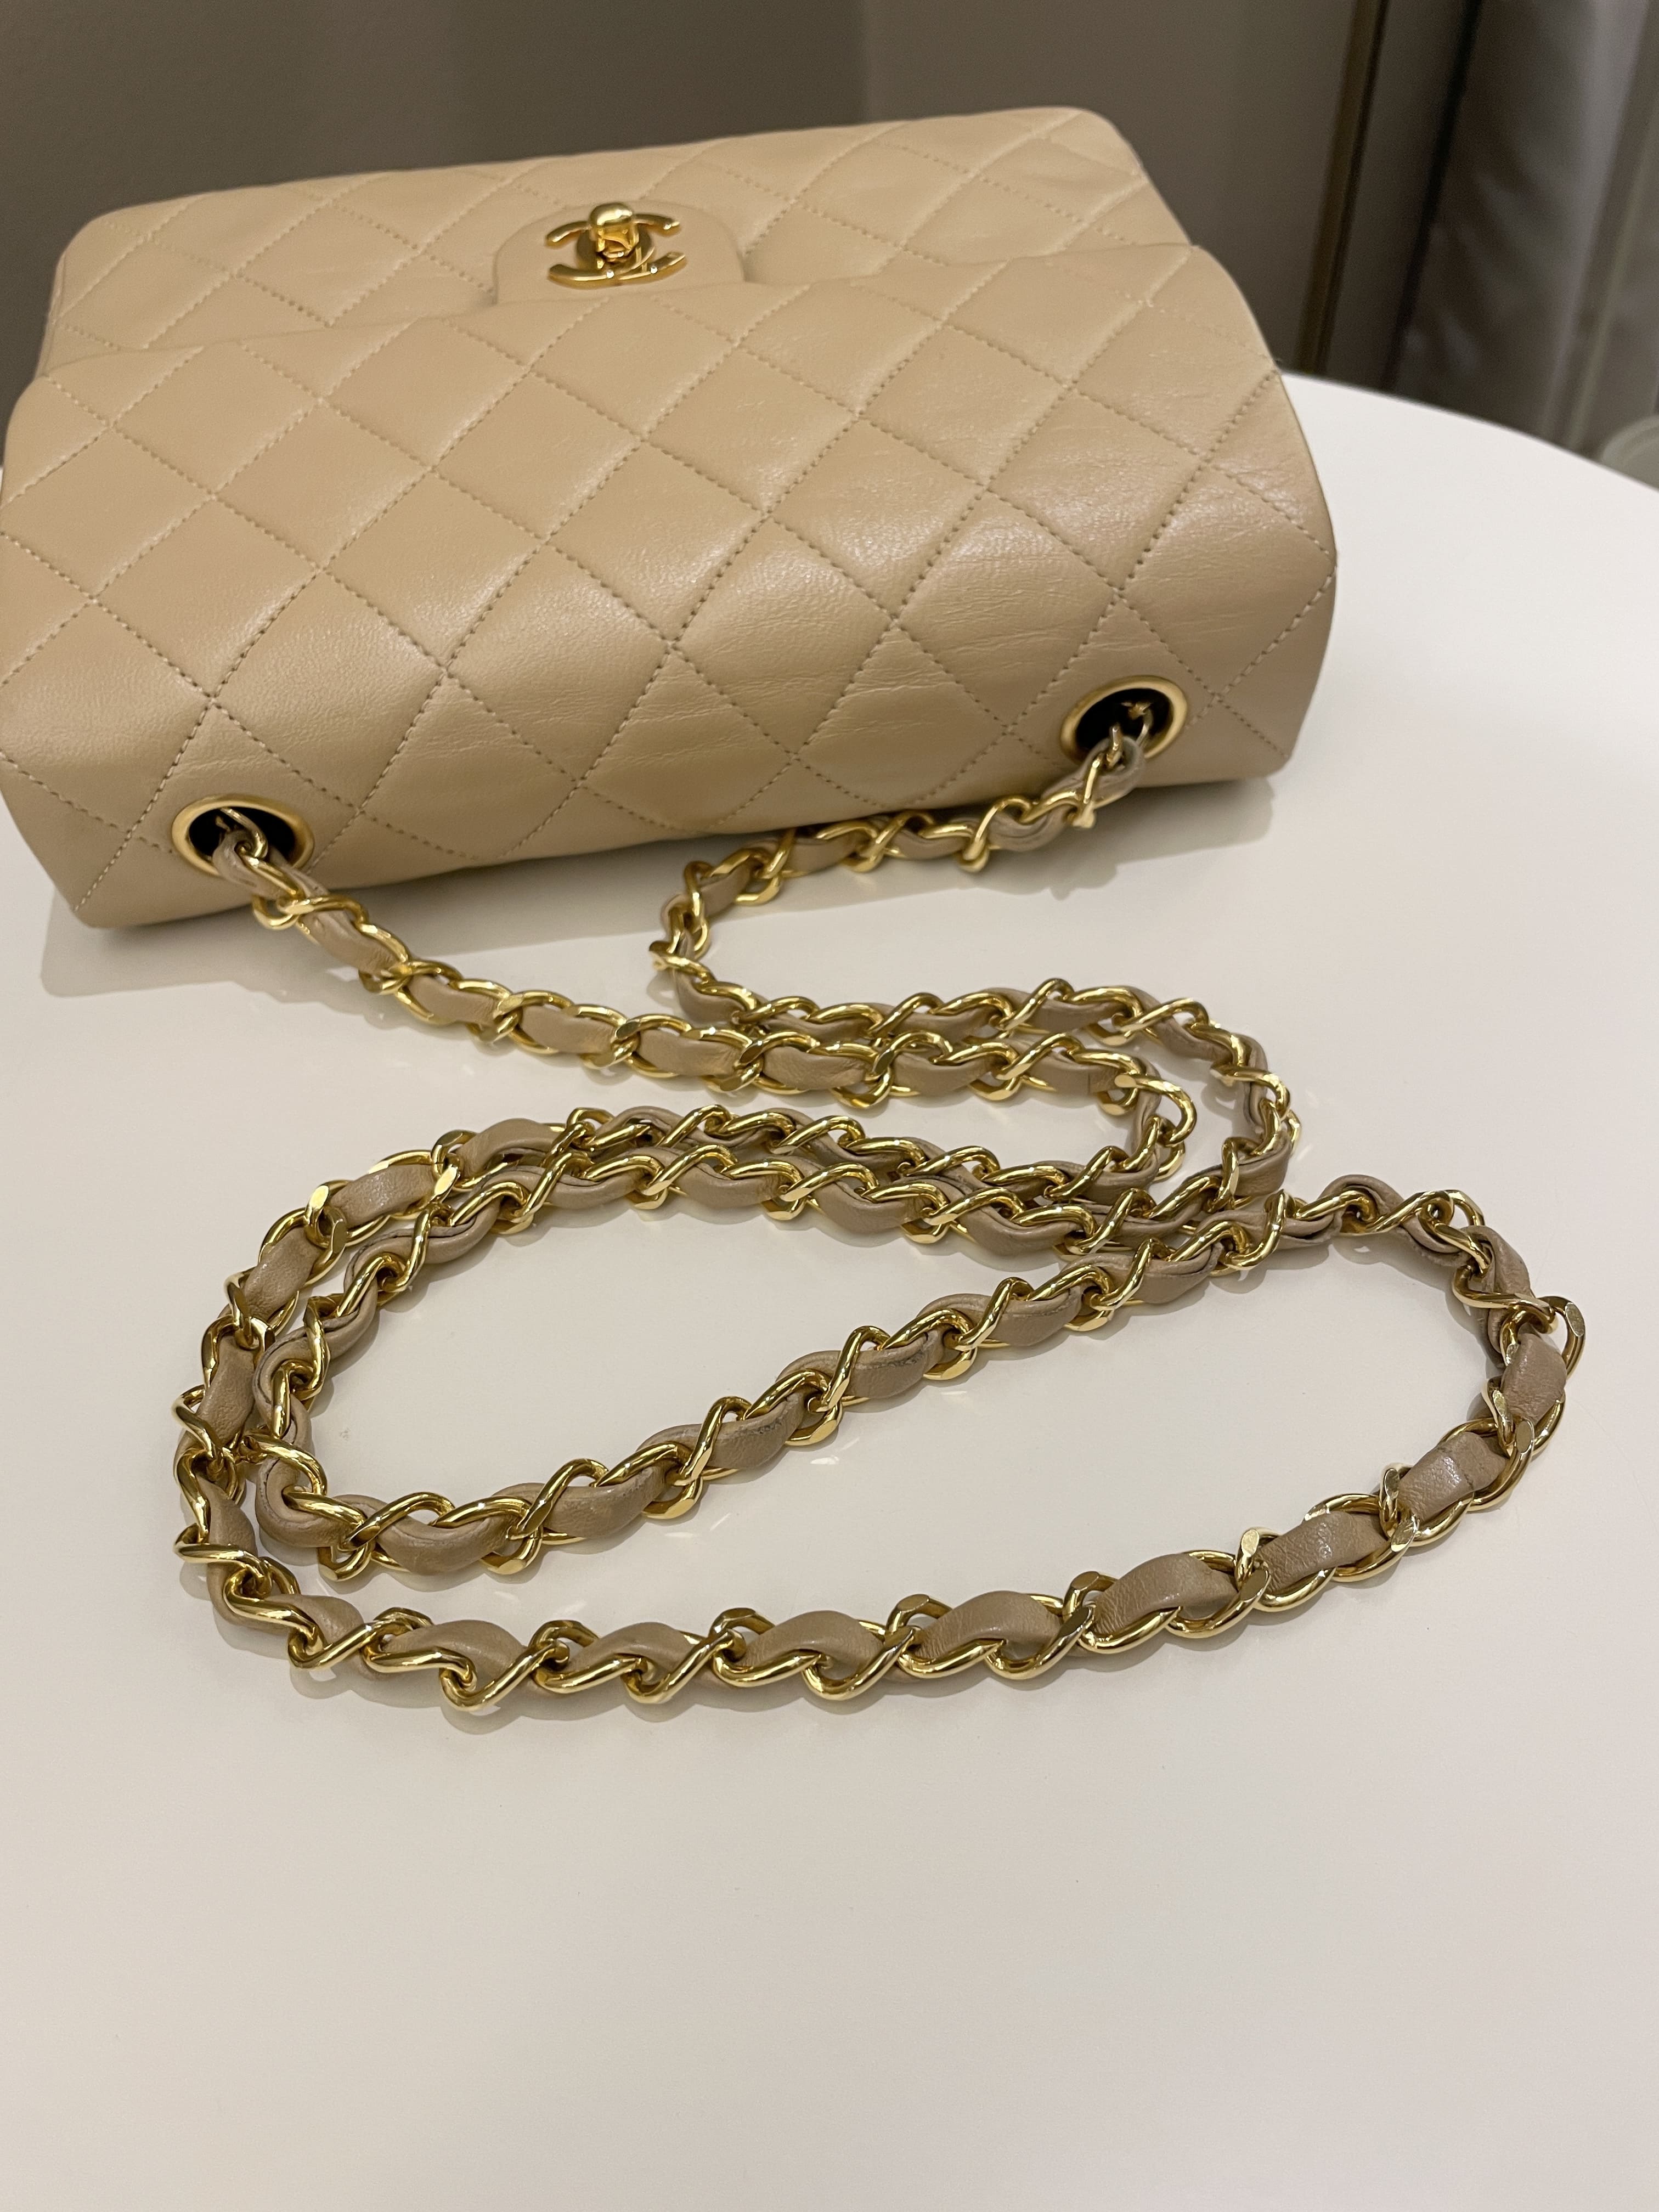 Chanel Vintage Quilted Flap Beige Lambskin